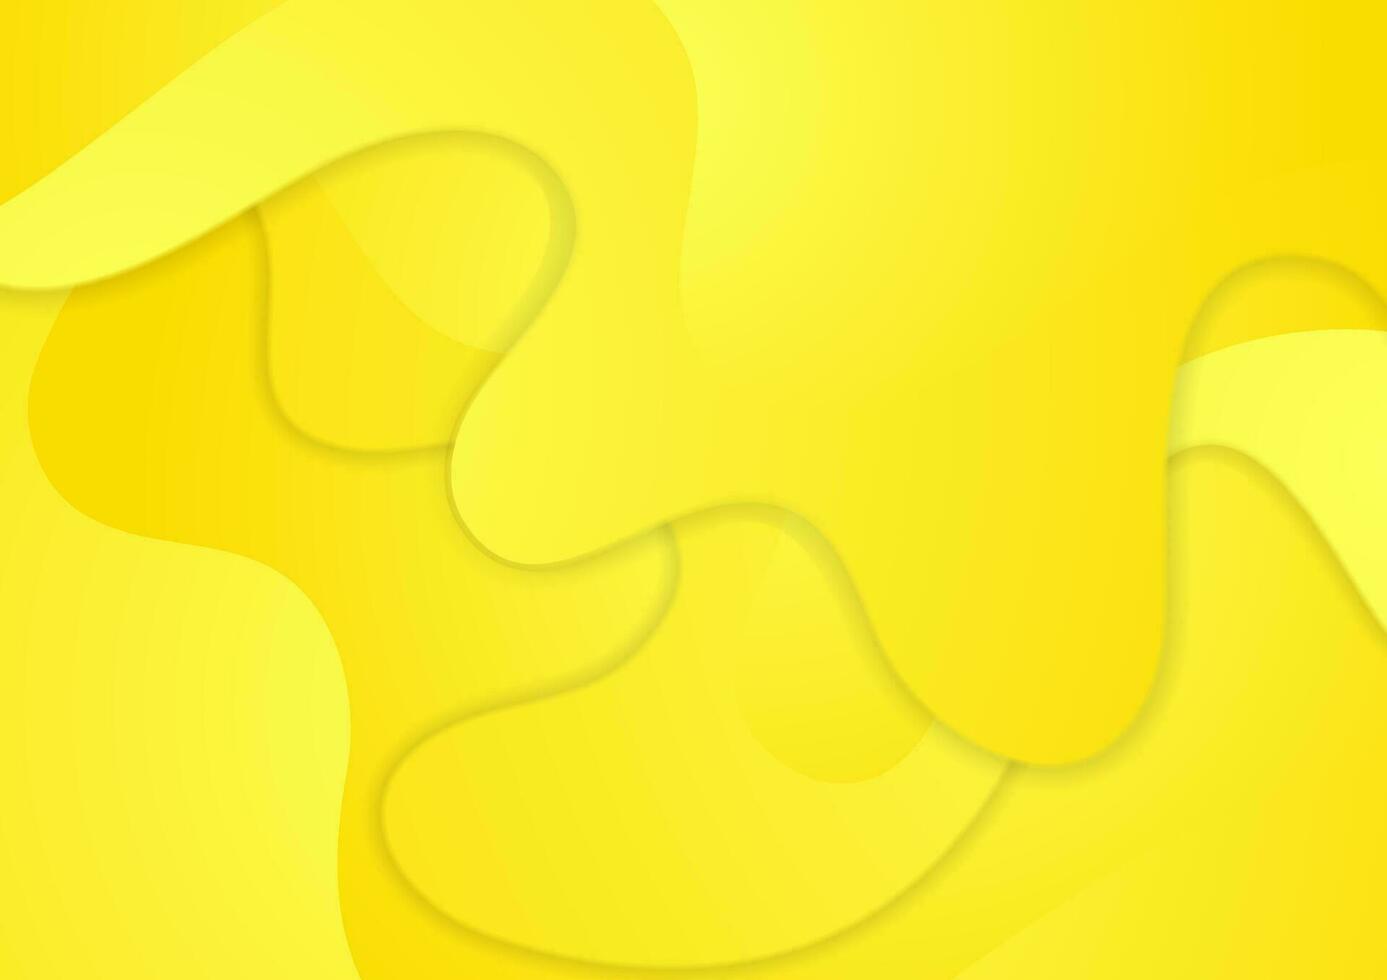 Bright yellow corporate wavy abstract background vector